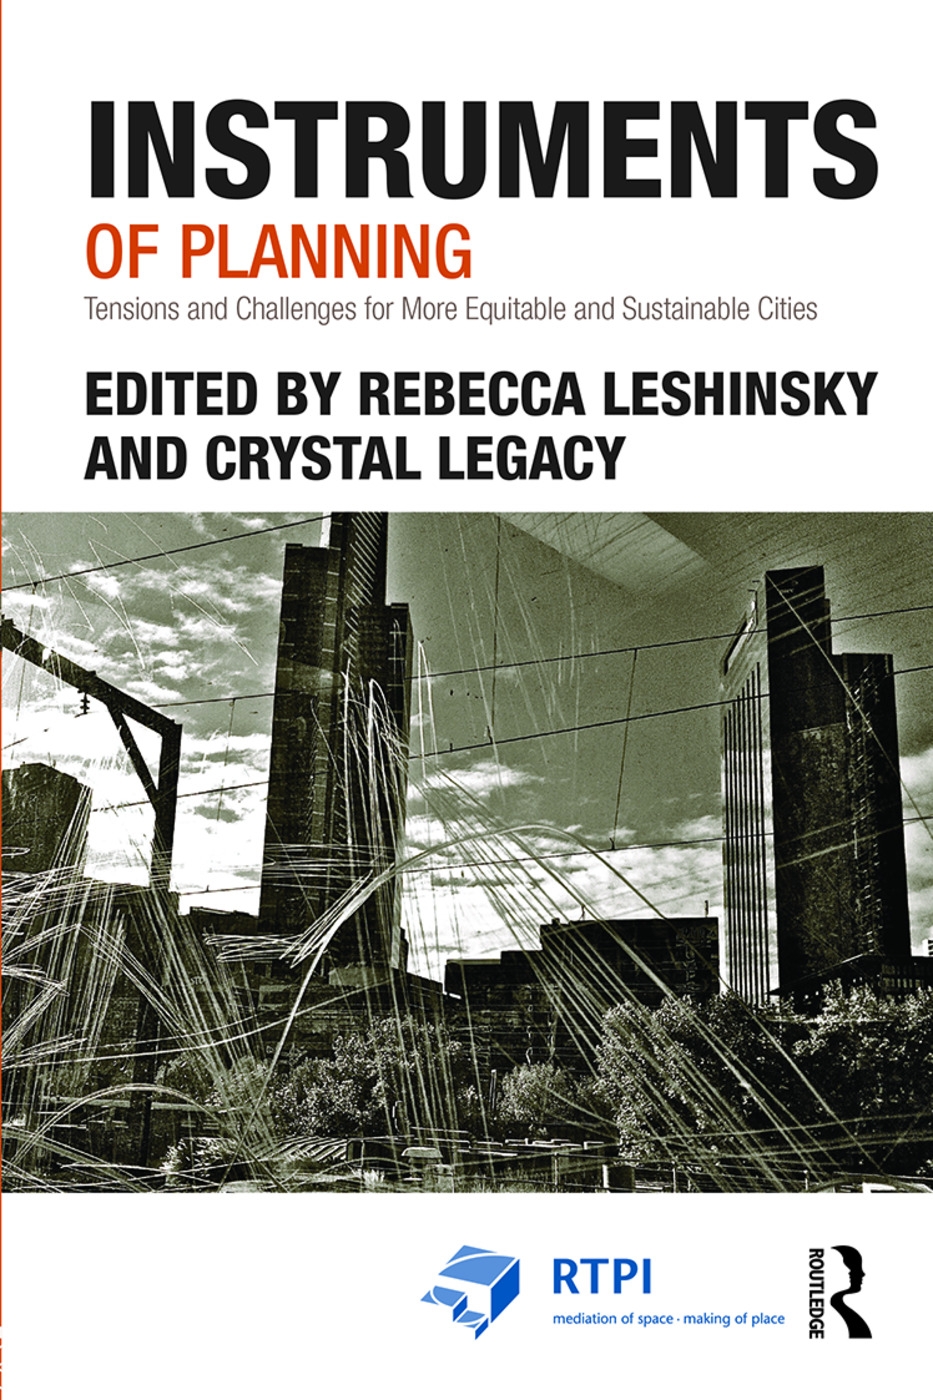 Instruments of Planning: Tensions and Challenges for More Equitable and Sustainable Cities